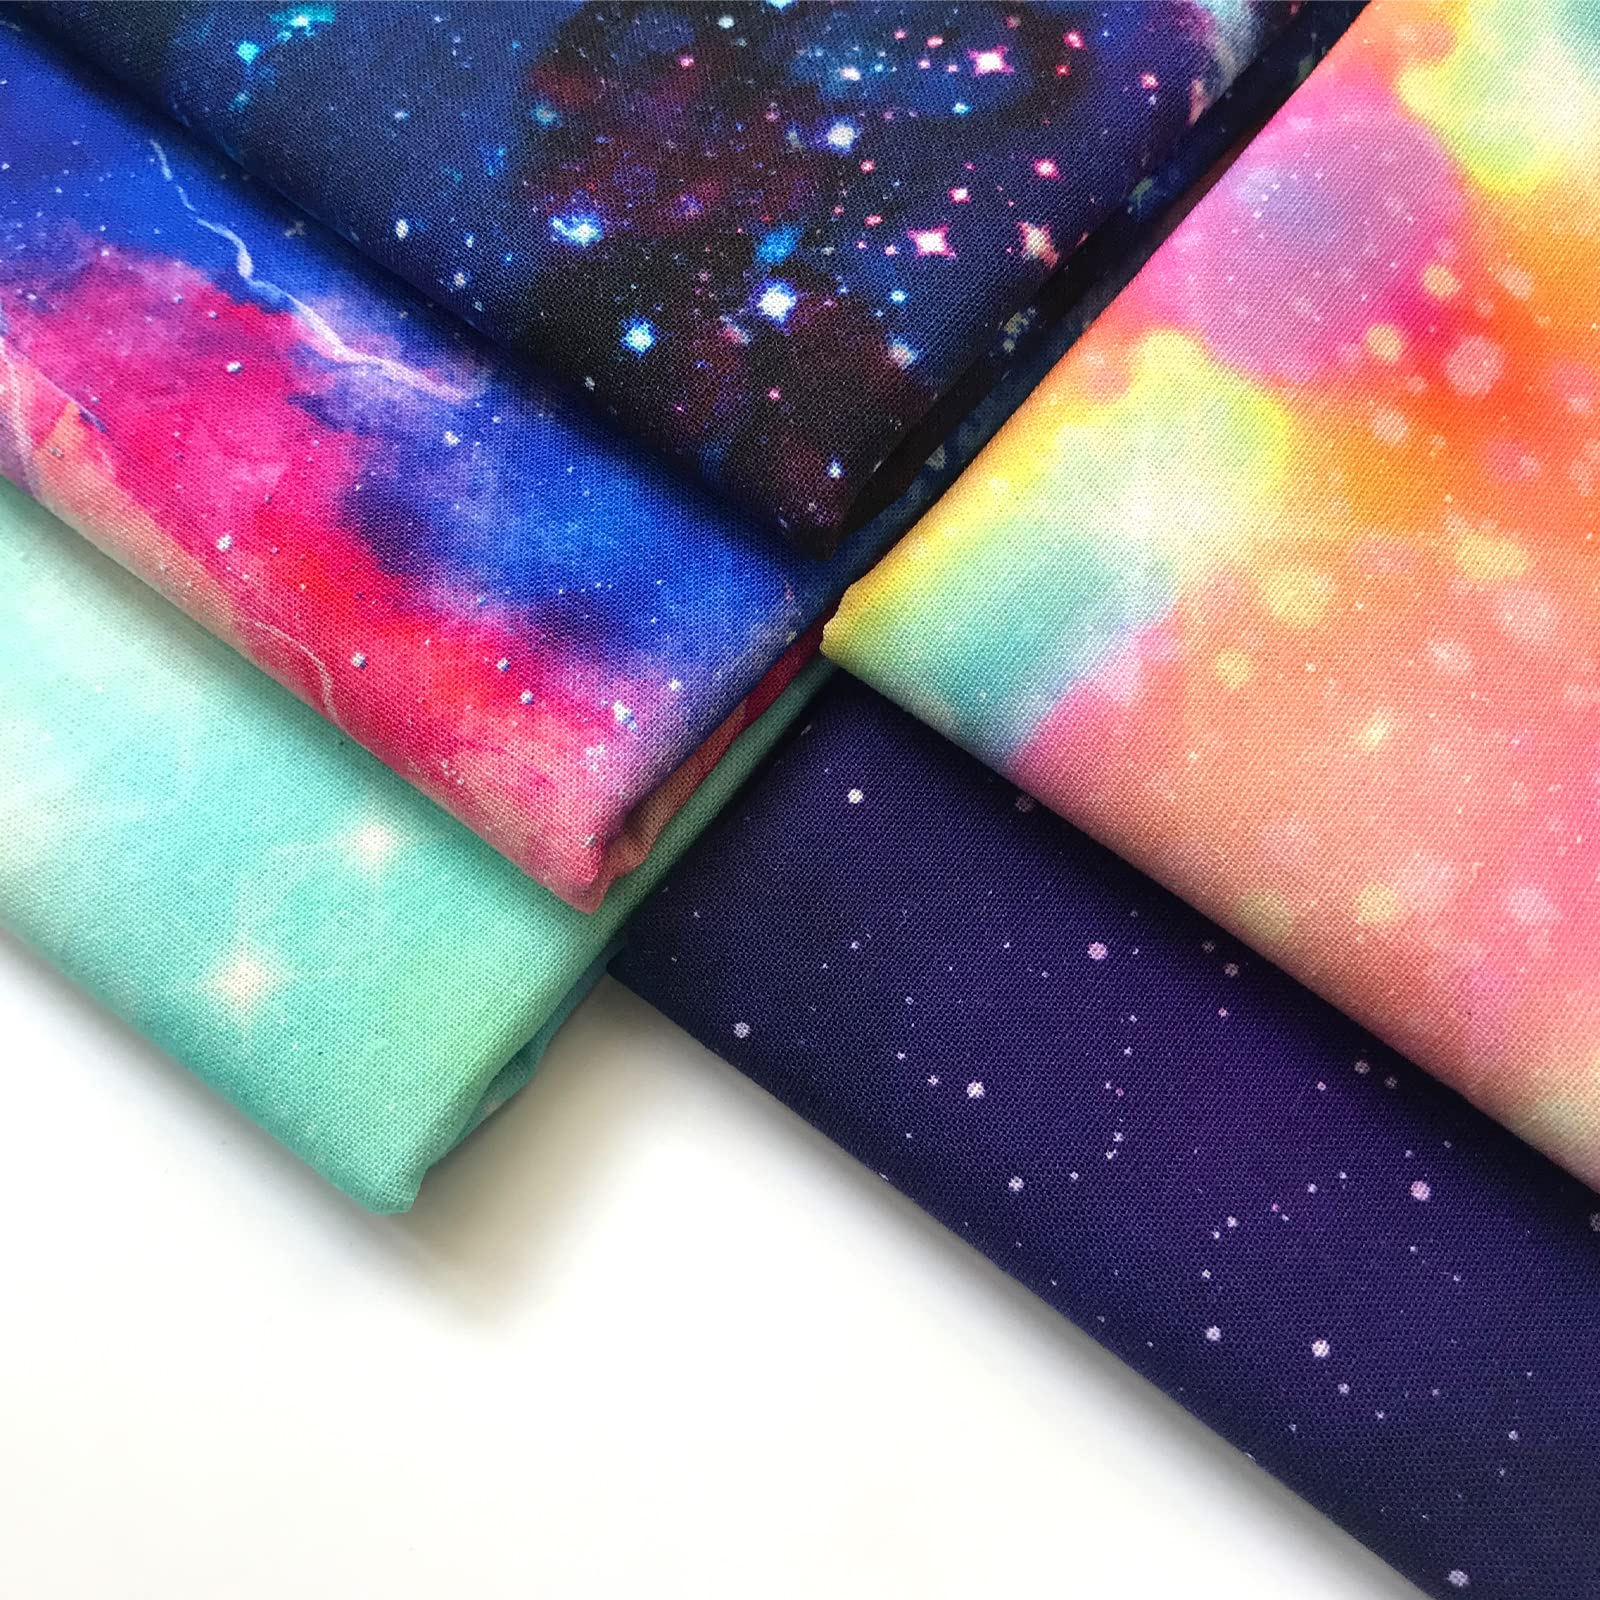 Misscrafts 5pcs Quilting Fabric 50x50cm 100% Cotton Craft Fabric Bundle Squares Fat Quarters Multicolored for Patchwork DIY Sewing Scrapbooking Starry